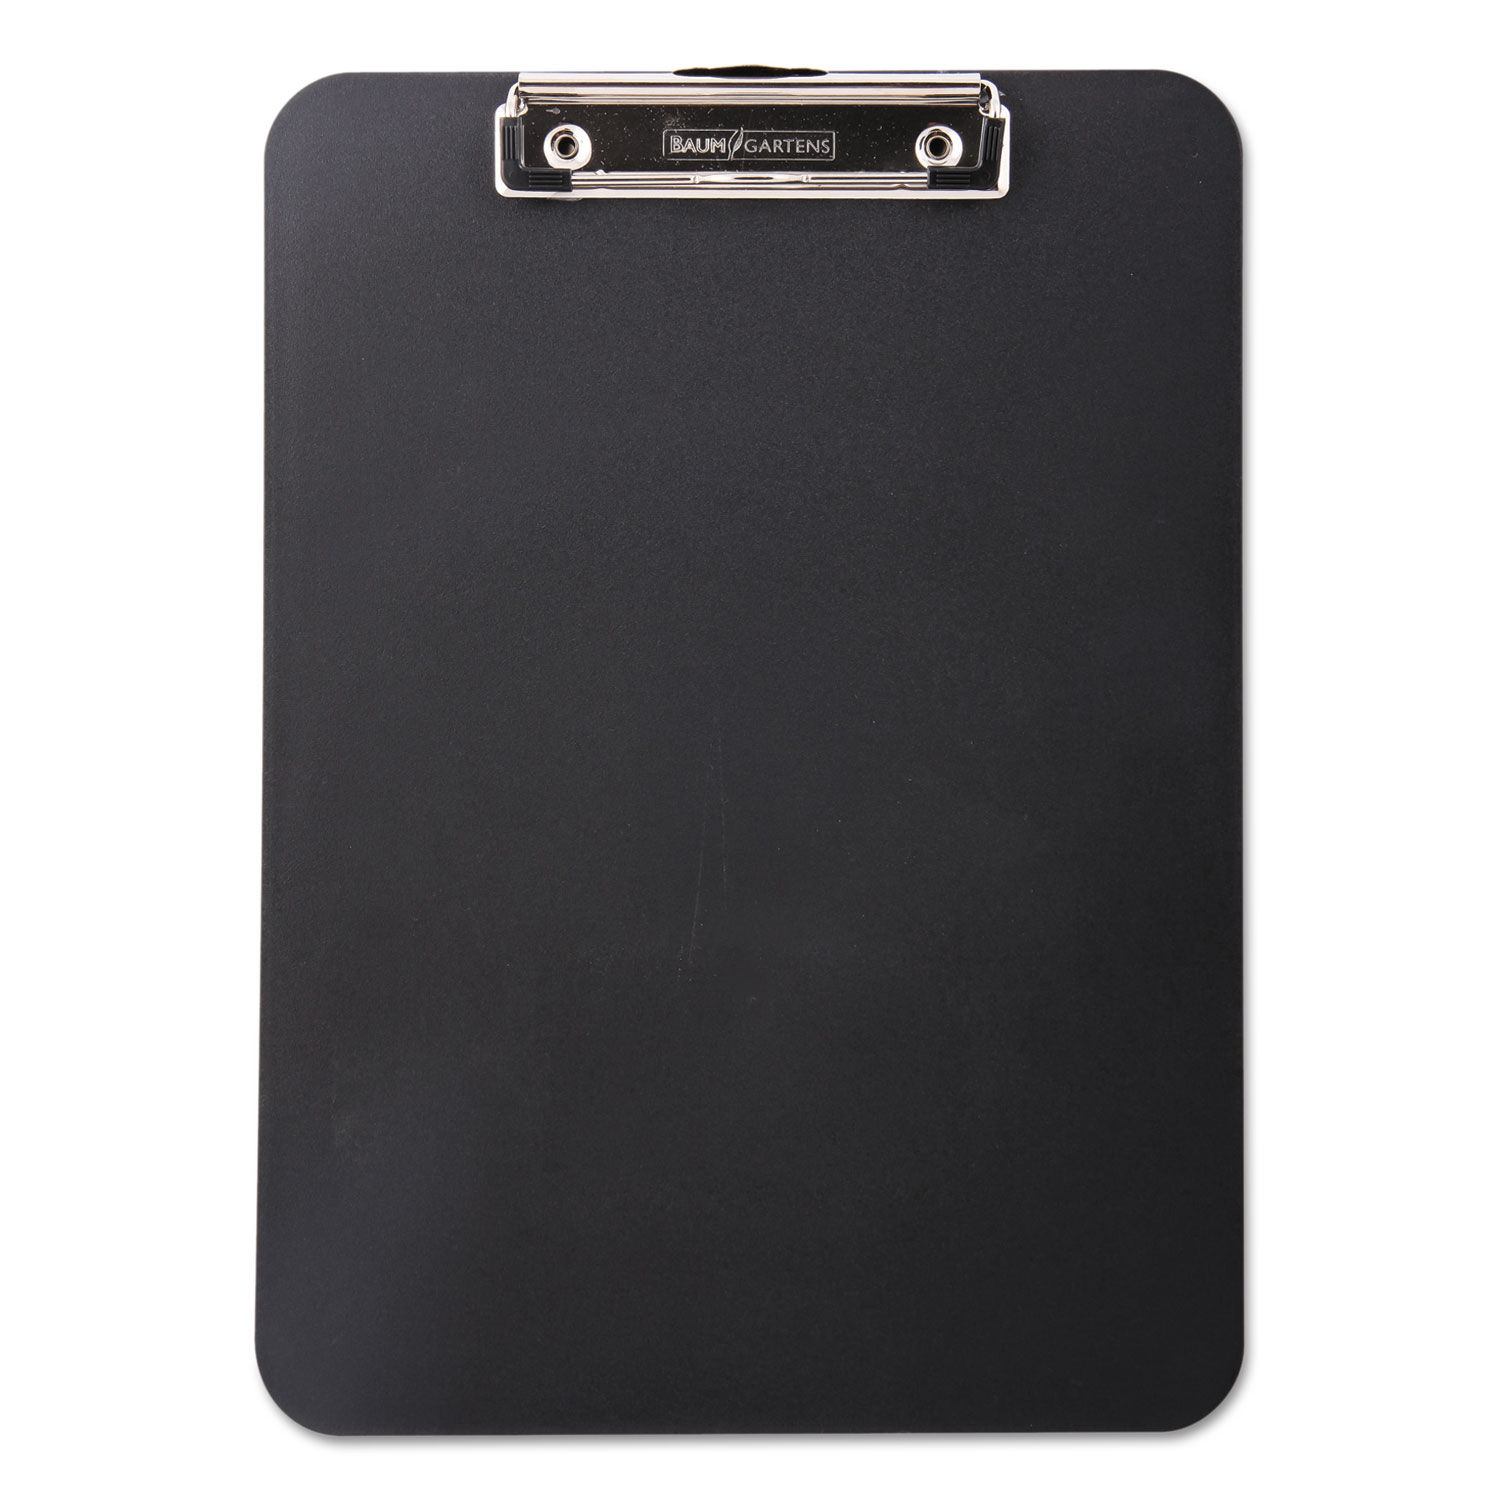 Unbreakable Recycled Clipboard by Mobile OPSandreg; BAU61624